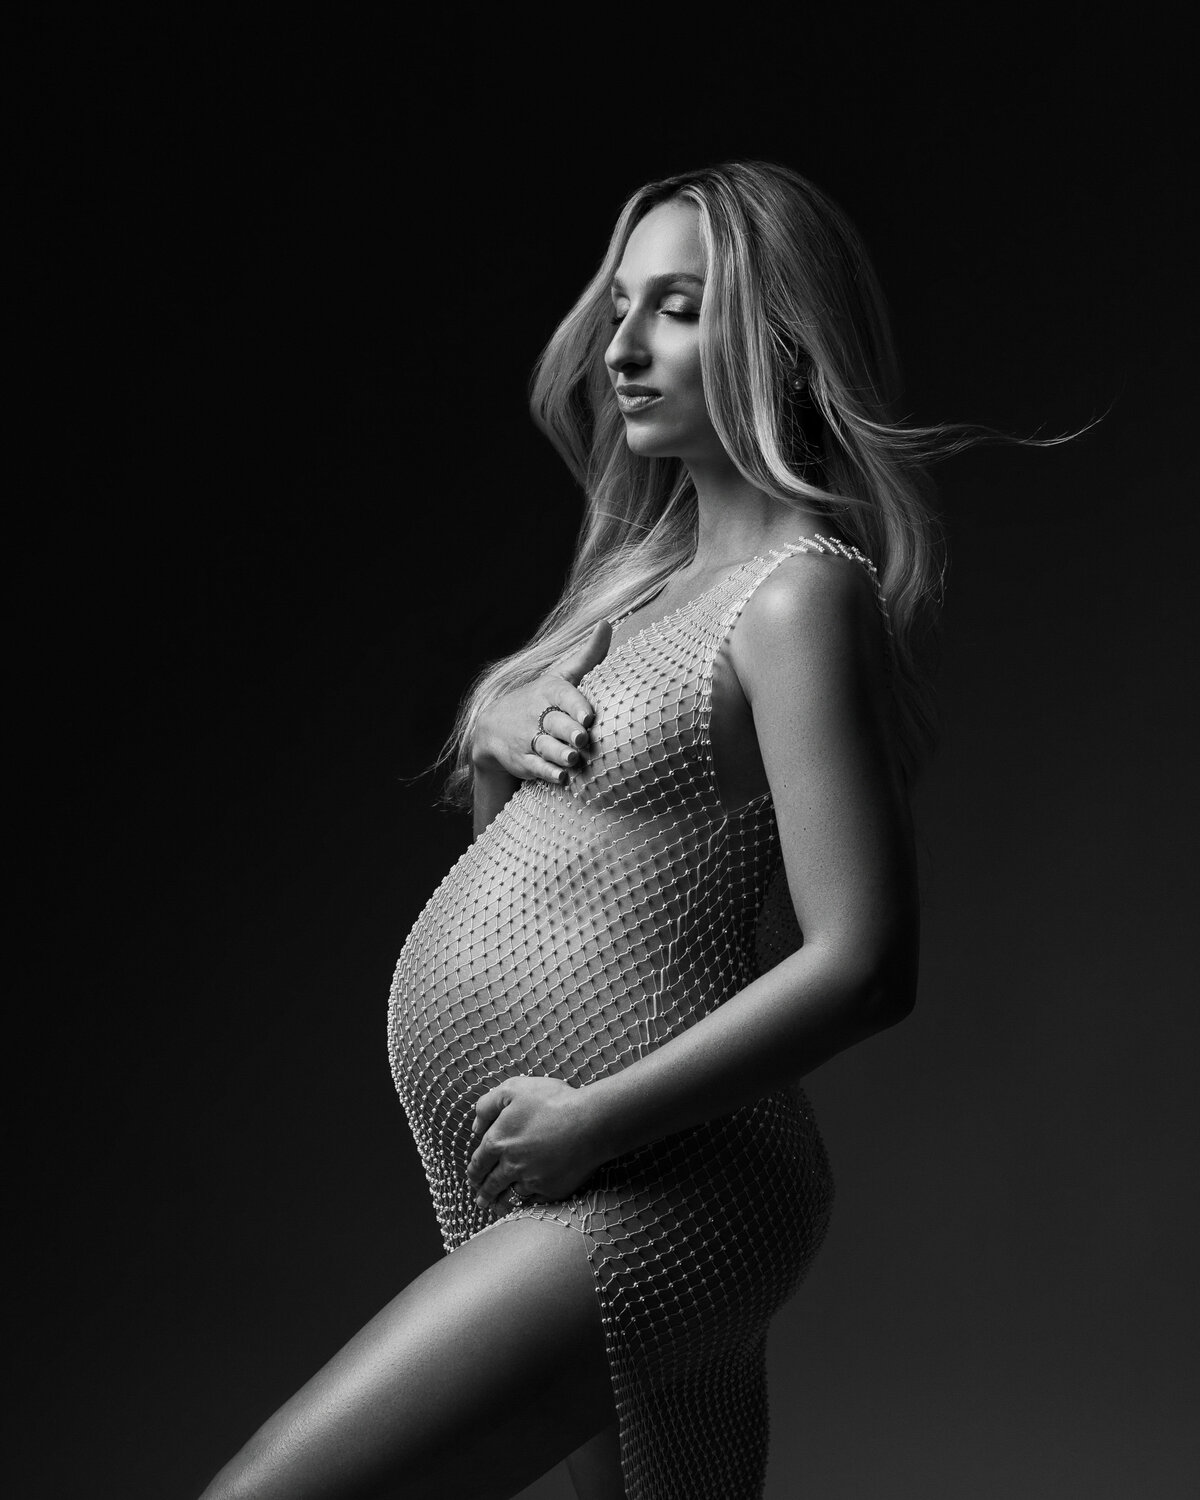 Classic and timeless maternity photo in black and white